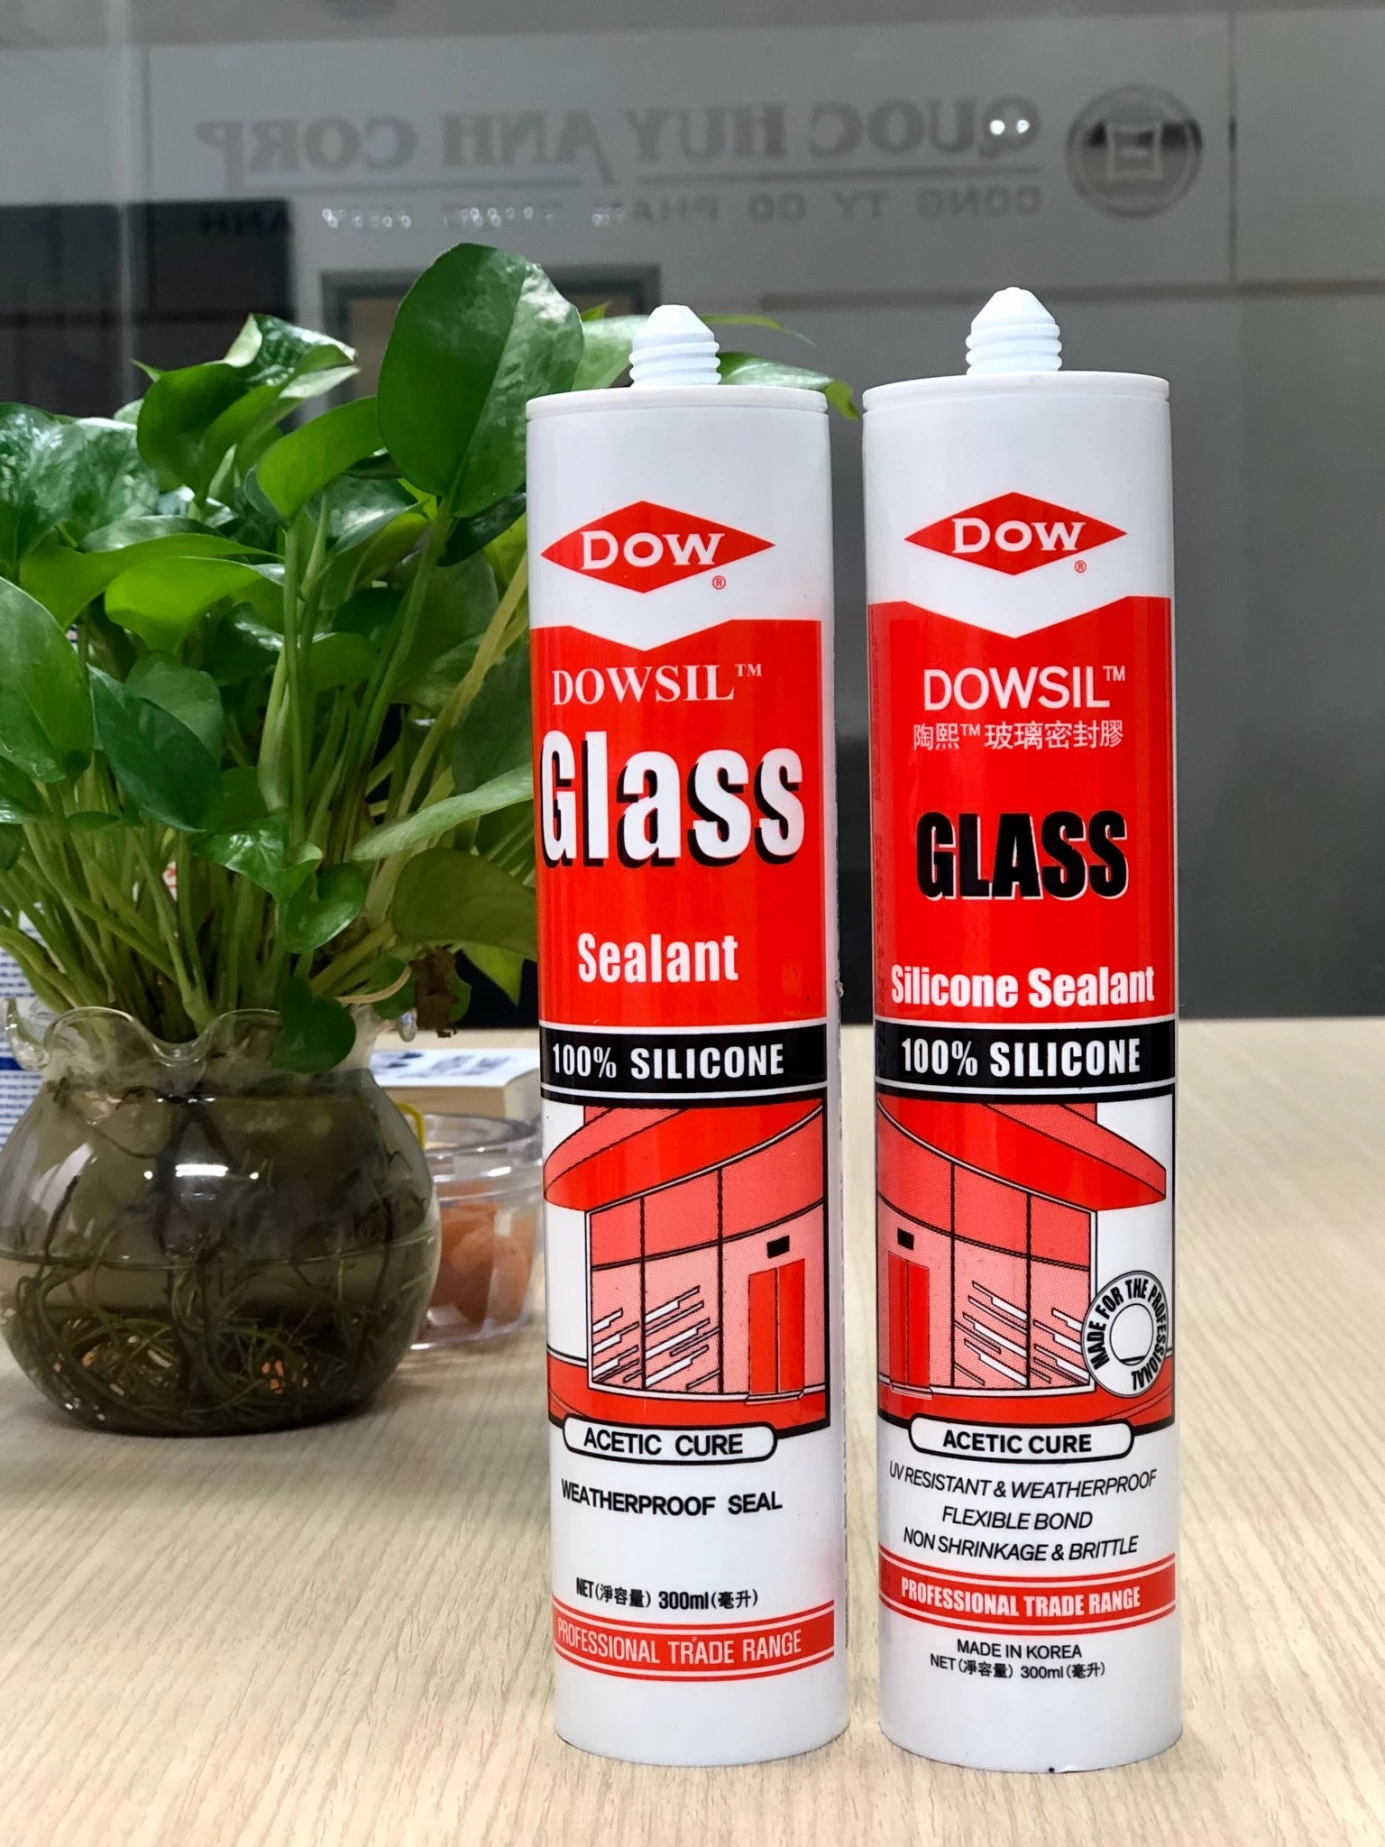 Dowsil Silicone changes packaging design